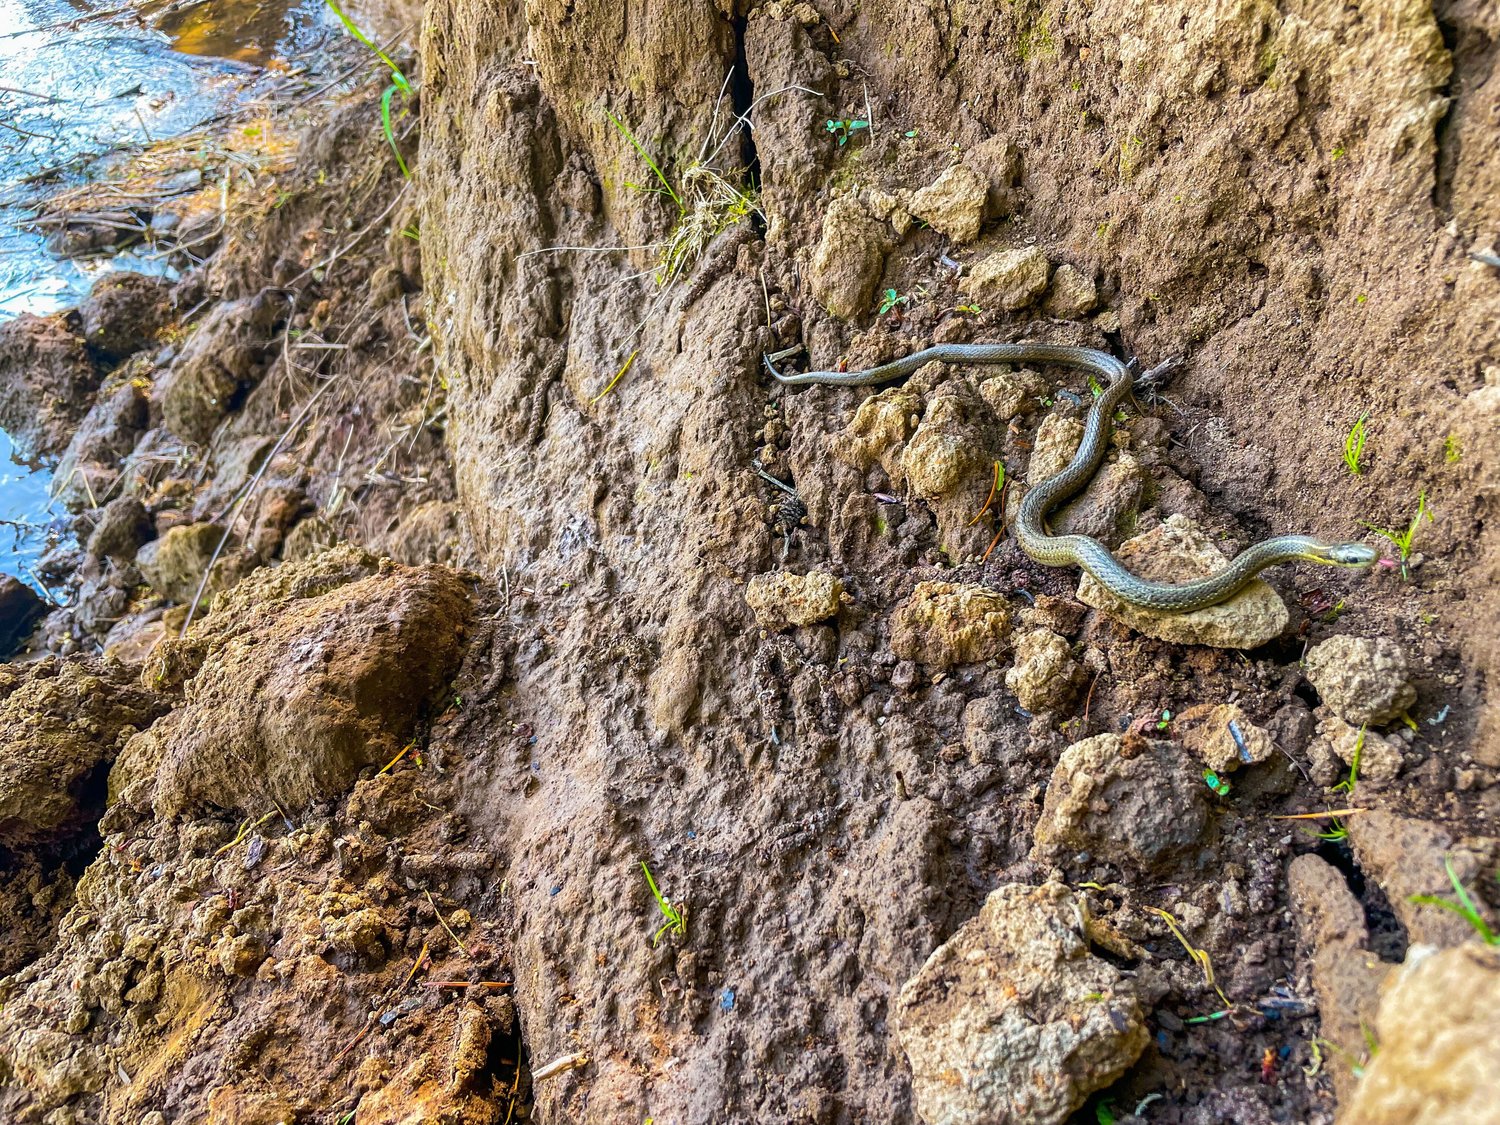 A Garter snake slithers along an eroded bank of clay on Chehalis River near Pe Ell on Saturday.